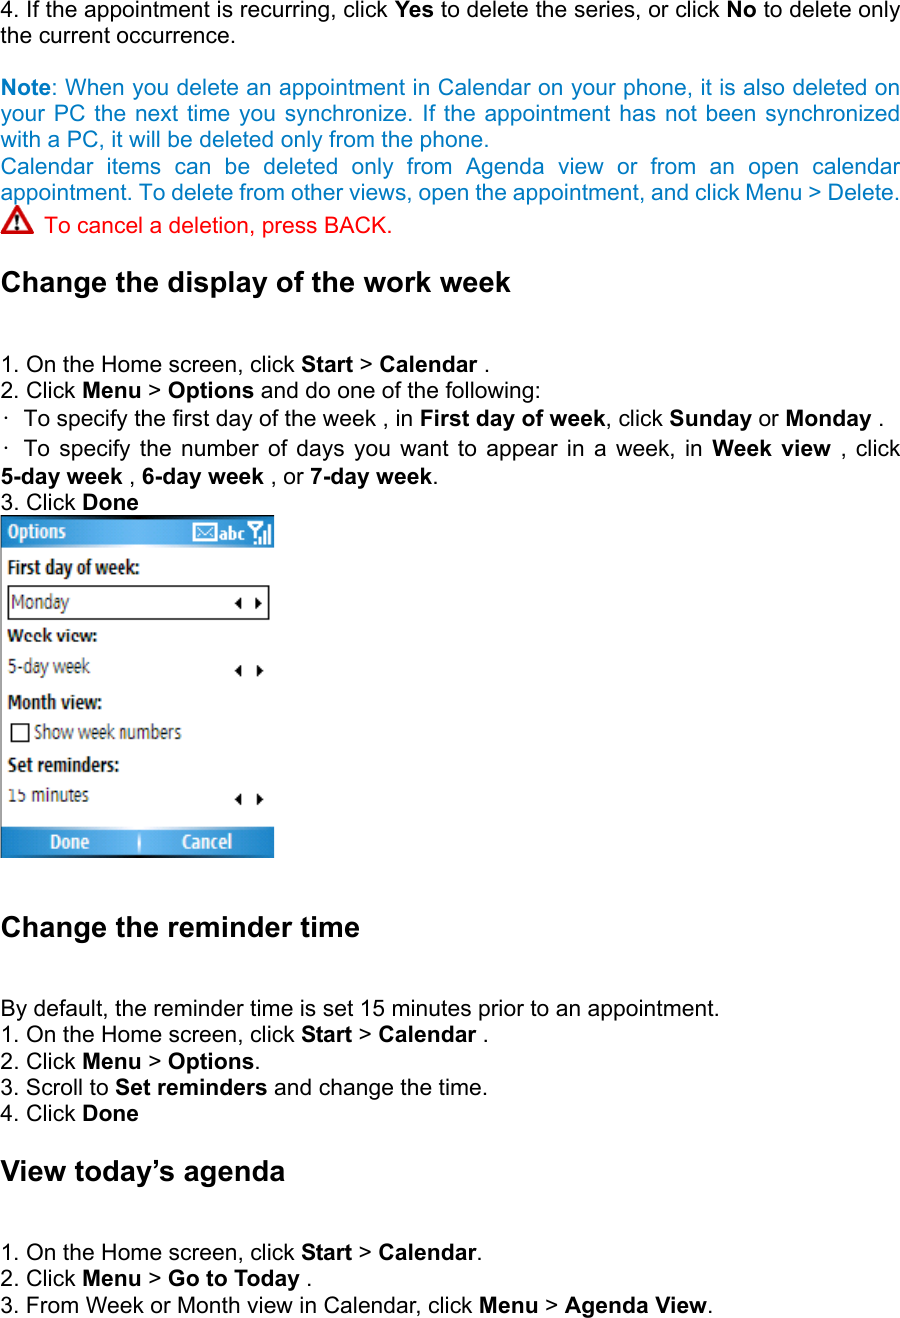 4. If the appointment is recurring, click Yes to delete the series, or click No to delete only the current occurrence.    Note: When you delete an appointment in Calendar on your phone, it is also deleted on your PC the next time you synchronize. If the appointment has not been synchronized with a PC, it will be deleted only from the phone. Calendar items can be deleted only from Agenda view or from an open calendar appointment. To delete from other views, open the appointment, and click Menu &gt; Delete.  To cancel a deletion, press BACK. Change the display of the work week   1. On the Home screen, click Start &gt; Calendar .   2. Click Menu &gt; Options and do one of the following:   •  To specify the first day of the week , in First day of week, click Sunday or Monday .   • To specify the number of days you want to appear in a week, in Week view , click 5-day week , 6-day week , or 7-day week.  3. Click Done   Change the reminder time   By default, the reminder time is set 15 minutes prior to an appointment.   1. On the Home screen, click Start &gt; Calendar .   2. Click Menu &gt; Options.  3. Scroll to Set reminders and change the time.   4. Click Done View today’s agenda   1. On the Home screen, click Start &gt; Calendar.  2. Click Menu &gt; Go to Today .   3. From Week or Month view in Calendar, click Menu &gt; Agenda View.  